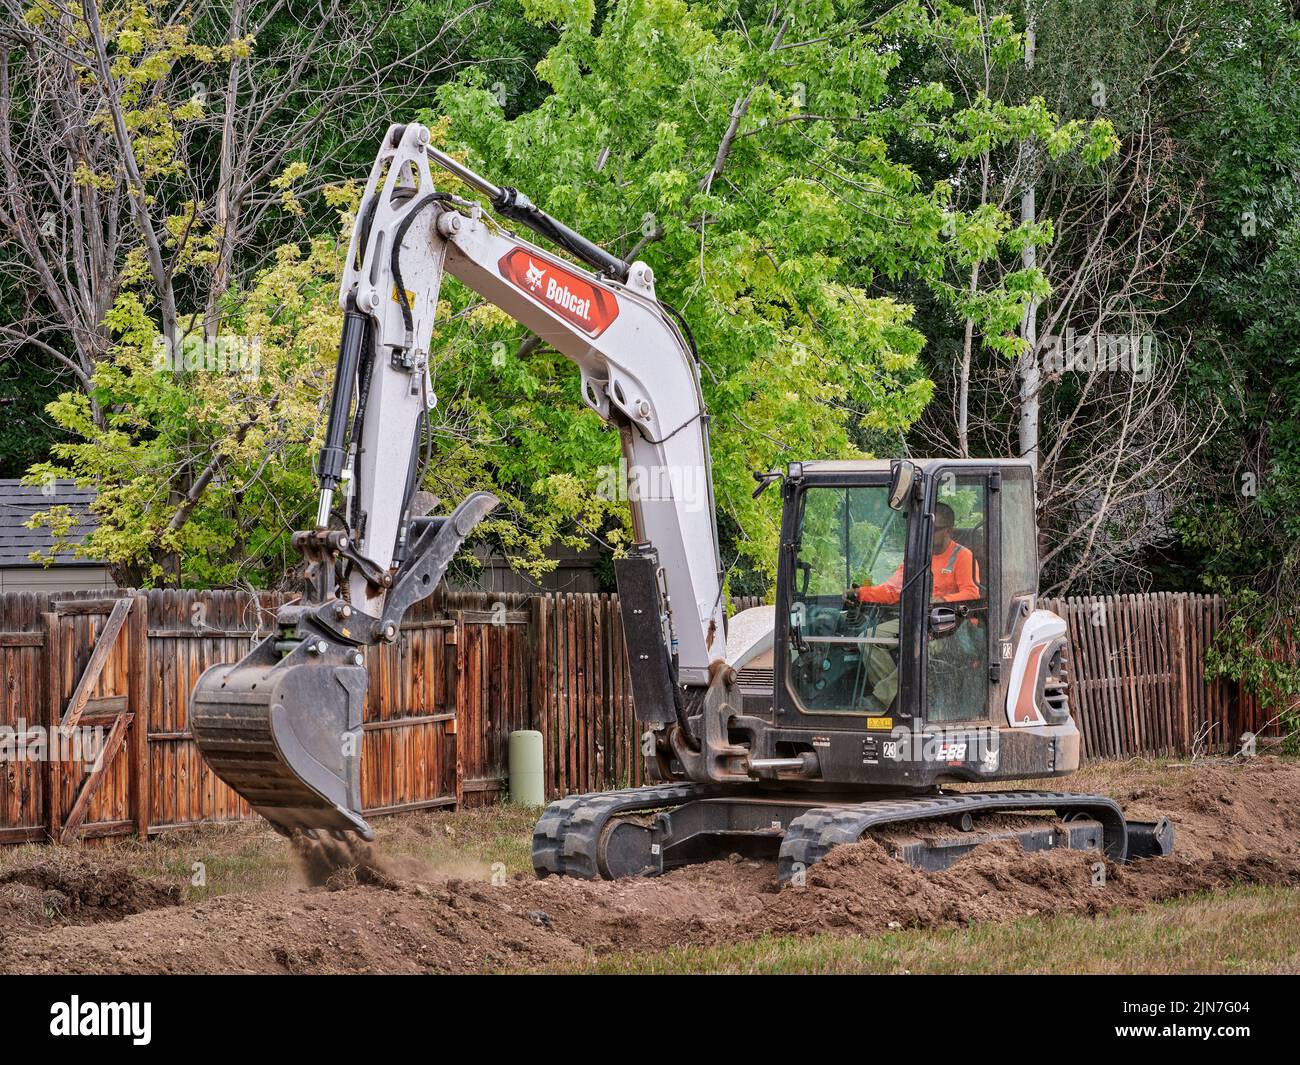 Fort Collins, CO, USA - July 21, 2022: E88, the largest Bobcat compact excavator working in a residential area along backyard fence. Stock Photo